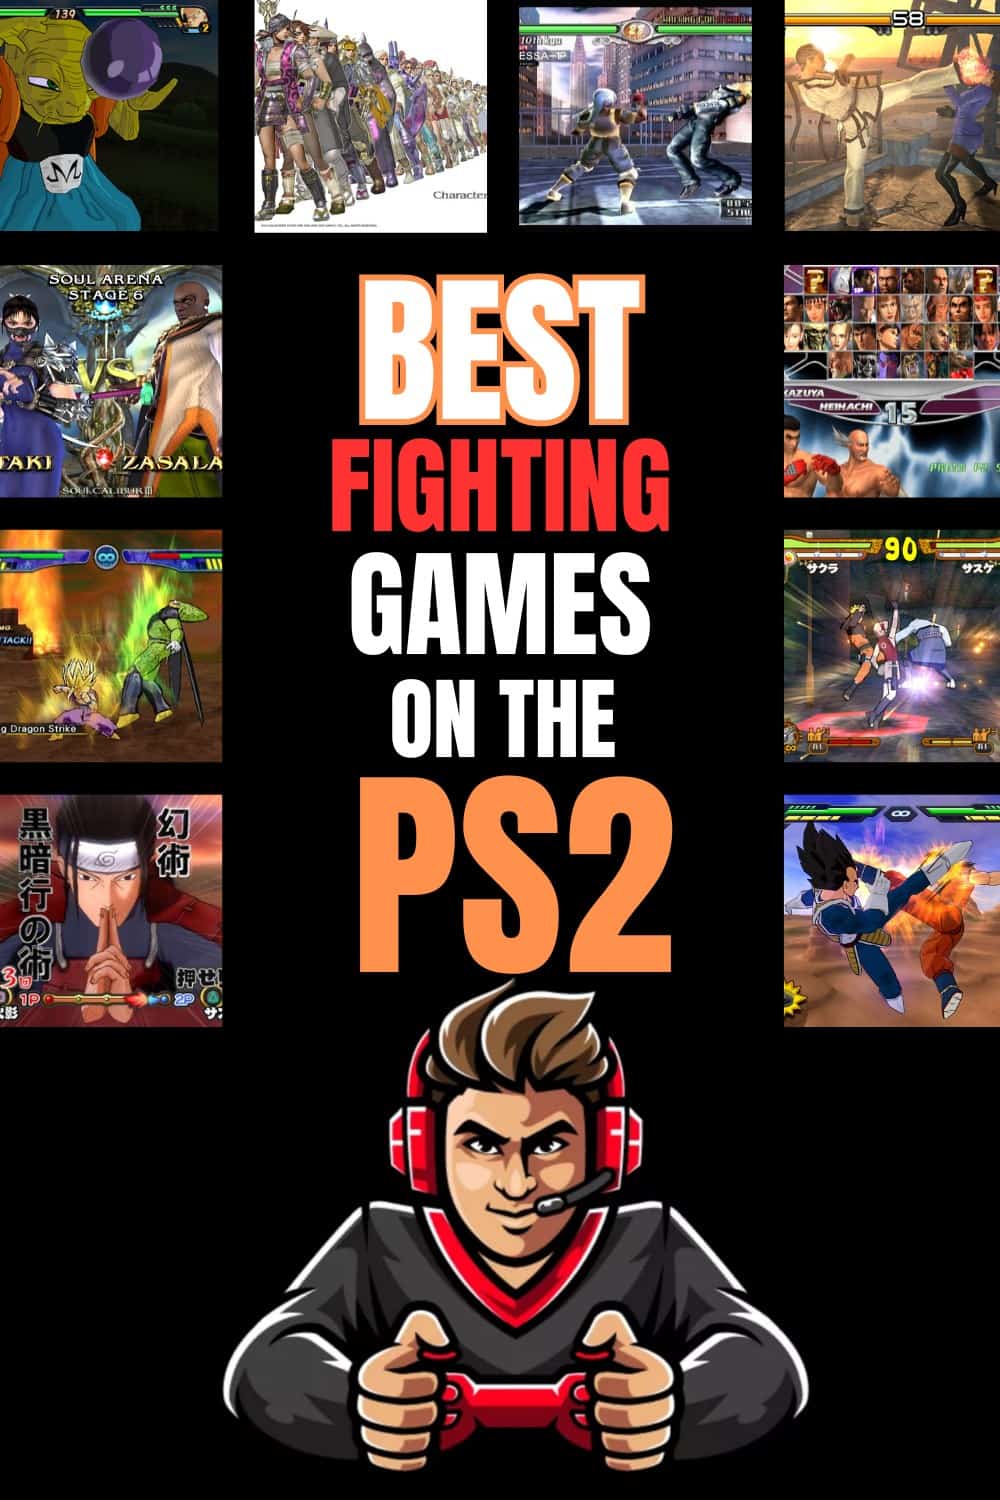 List of PS2 Fighting Games